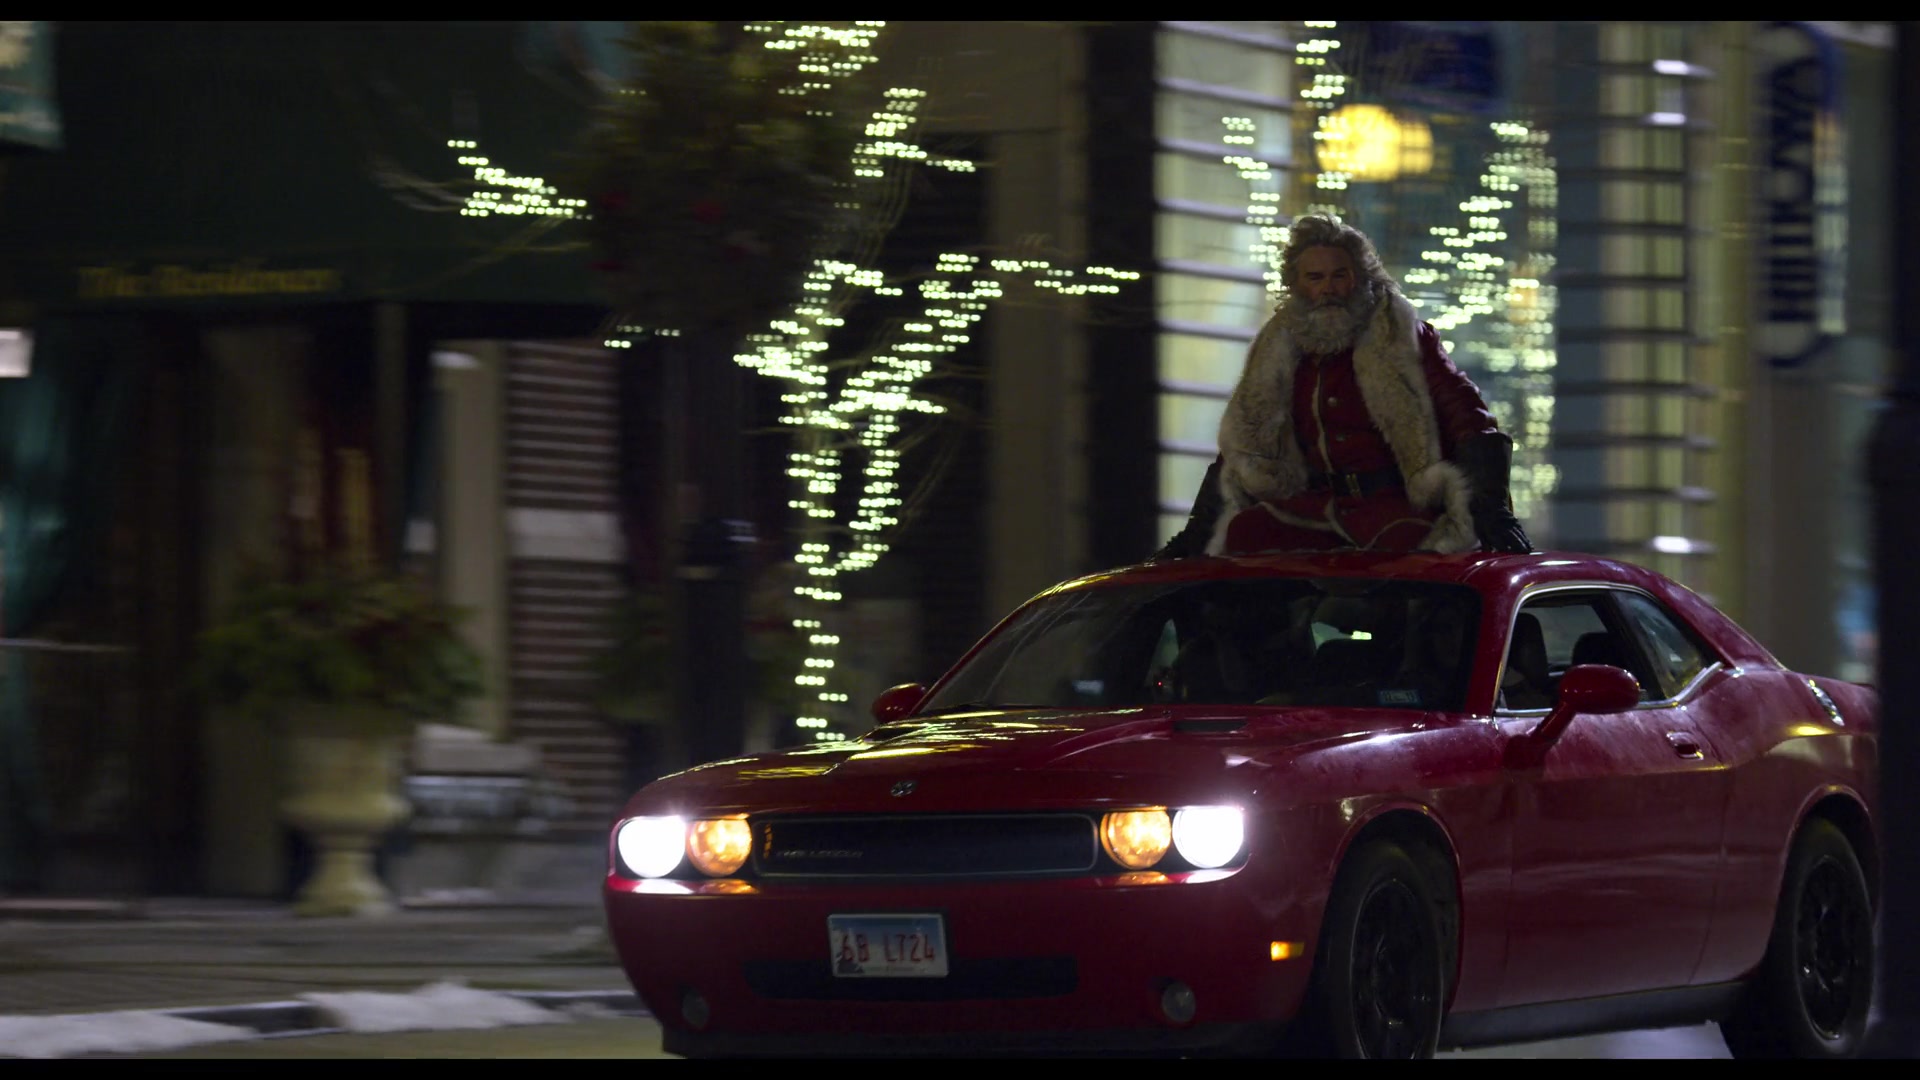 Dodge Challenger Car in The Christmas Chronicles (2018) Movie1920 x 1080